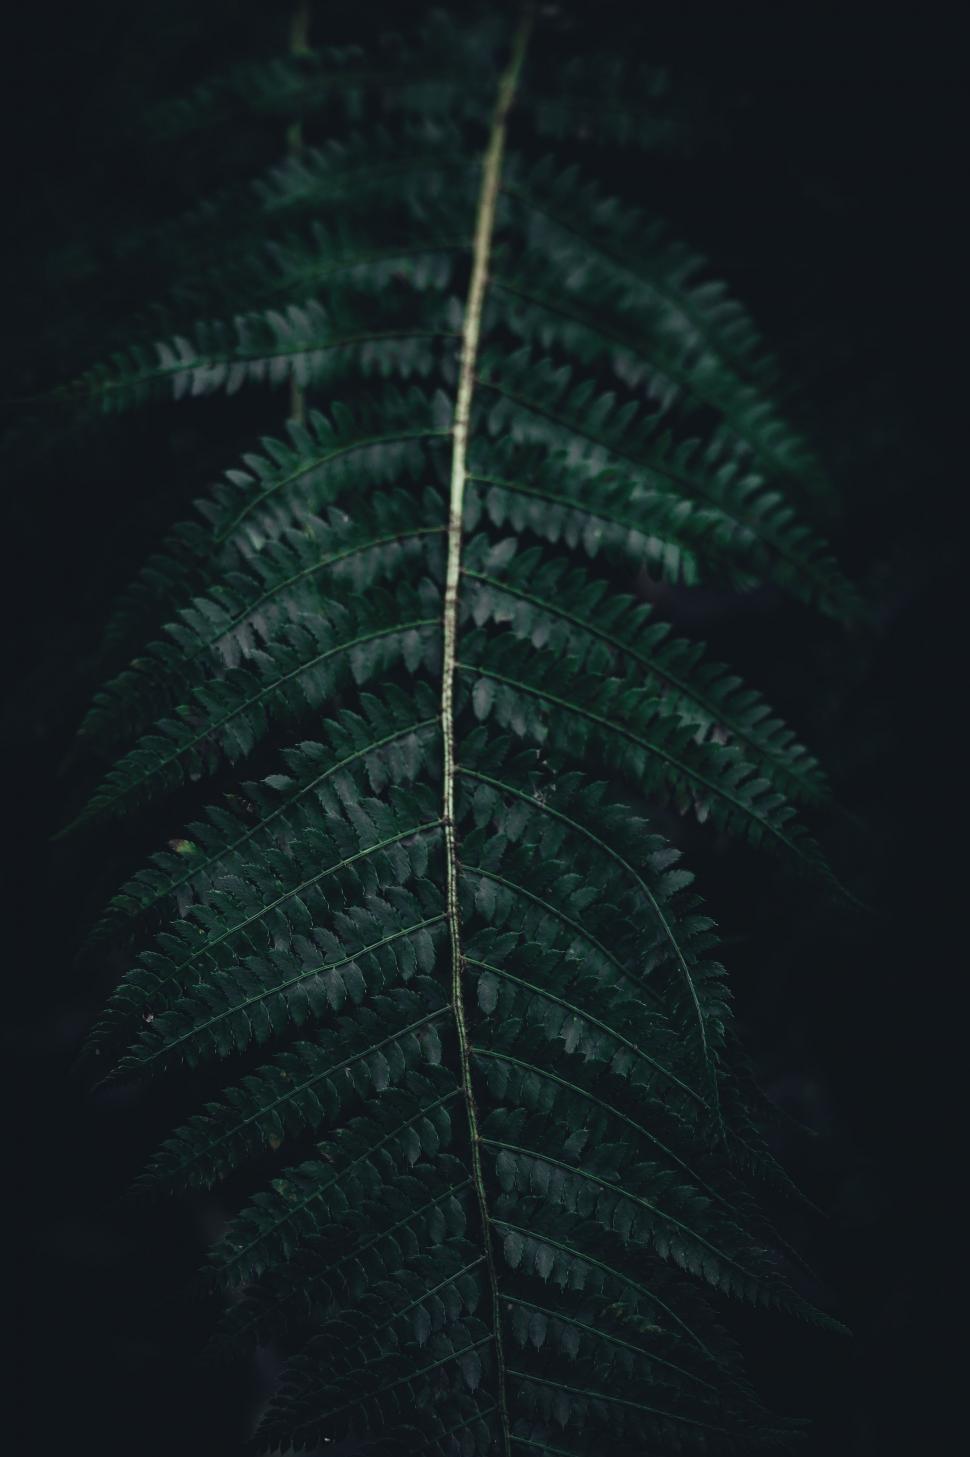 Free Image of Close-Up of Fern Leaf in the Dark 